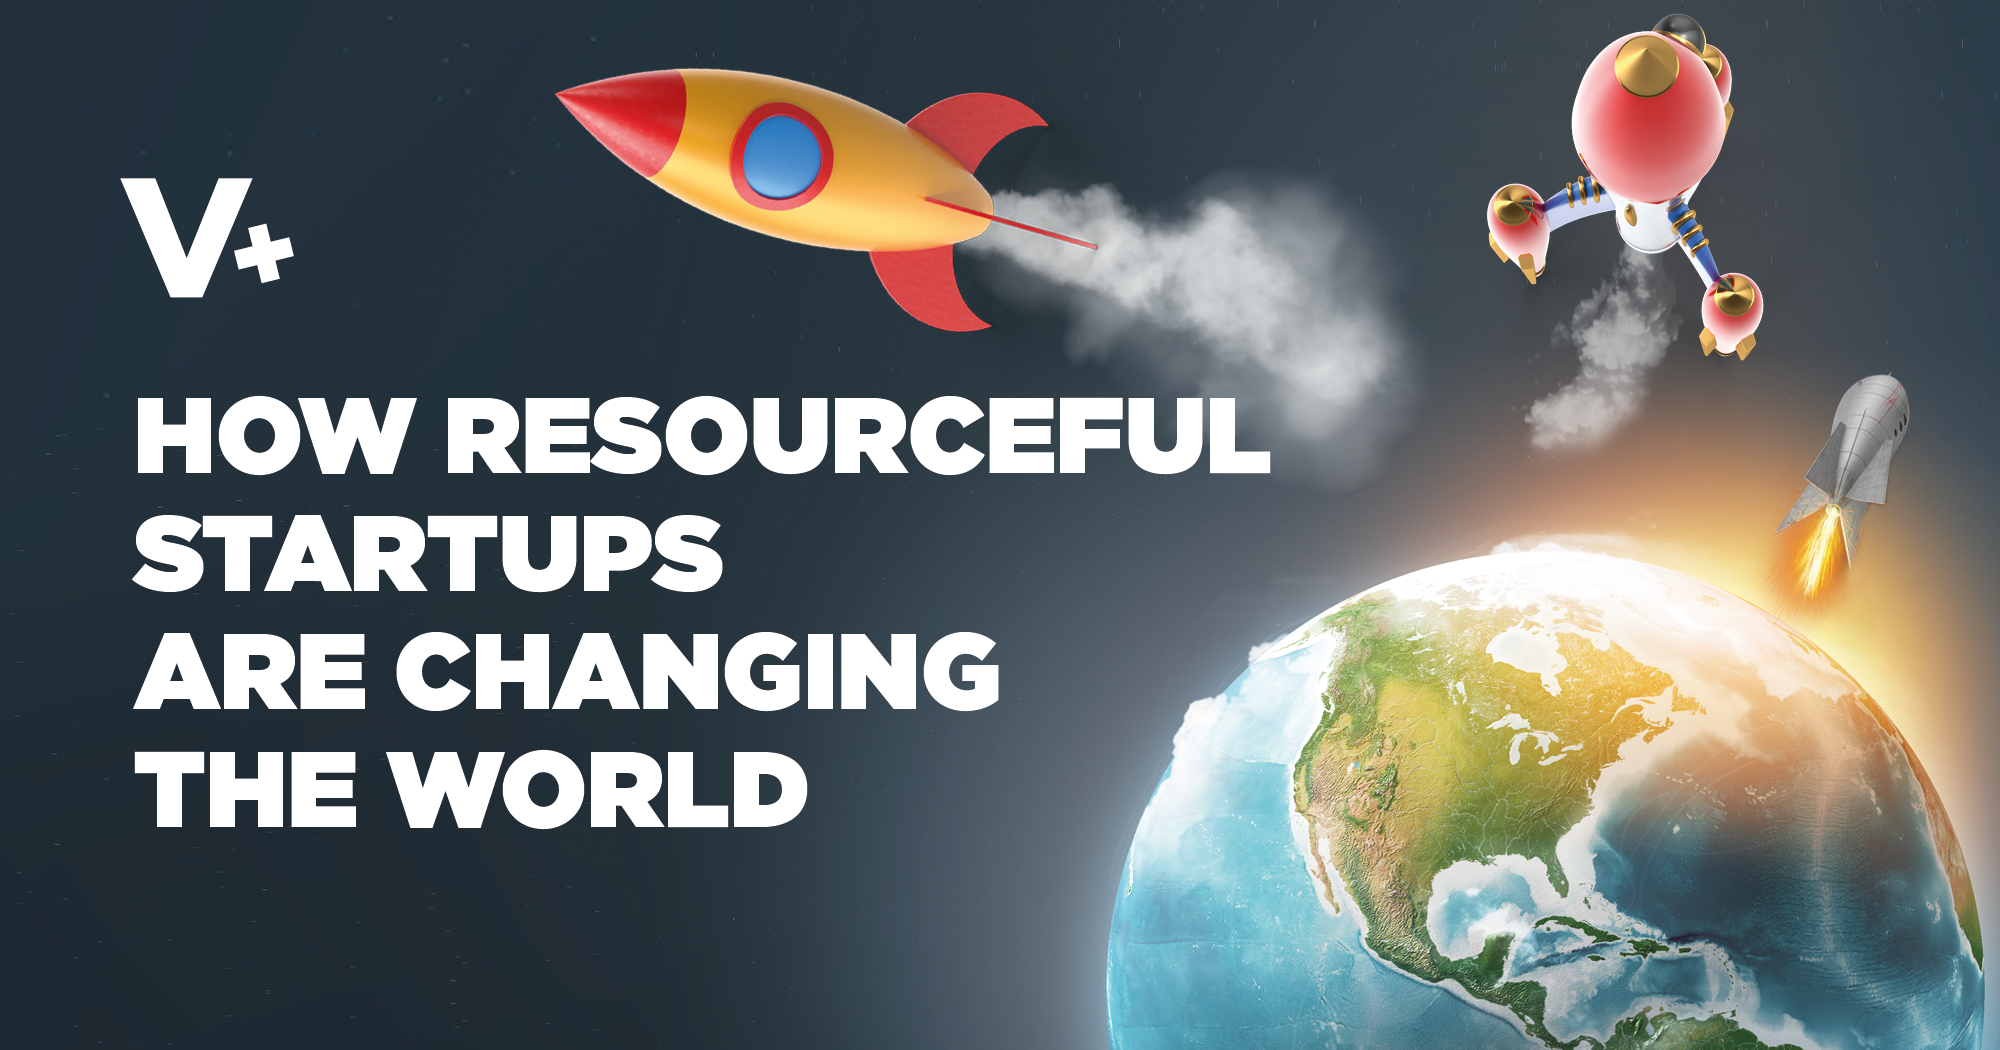 Startups That Are Changing the World and How They Did It